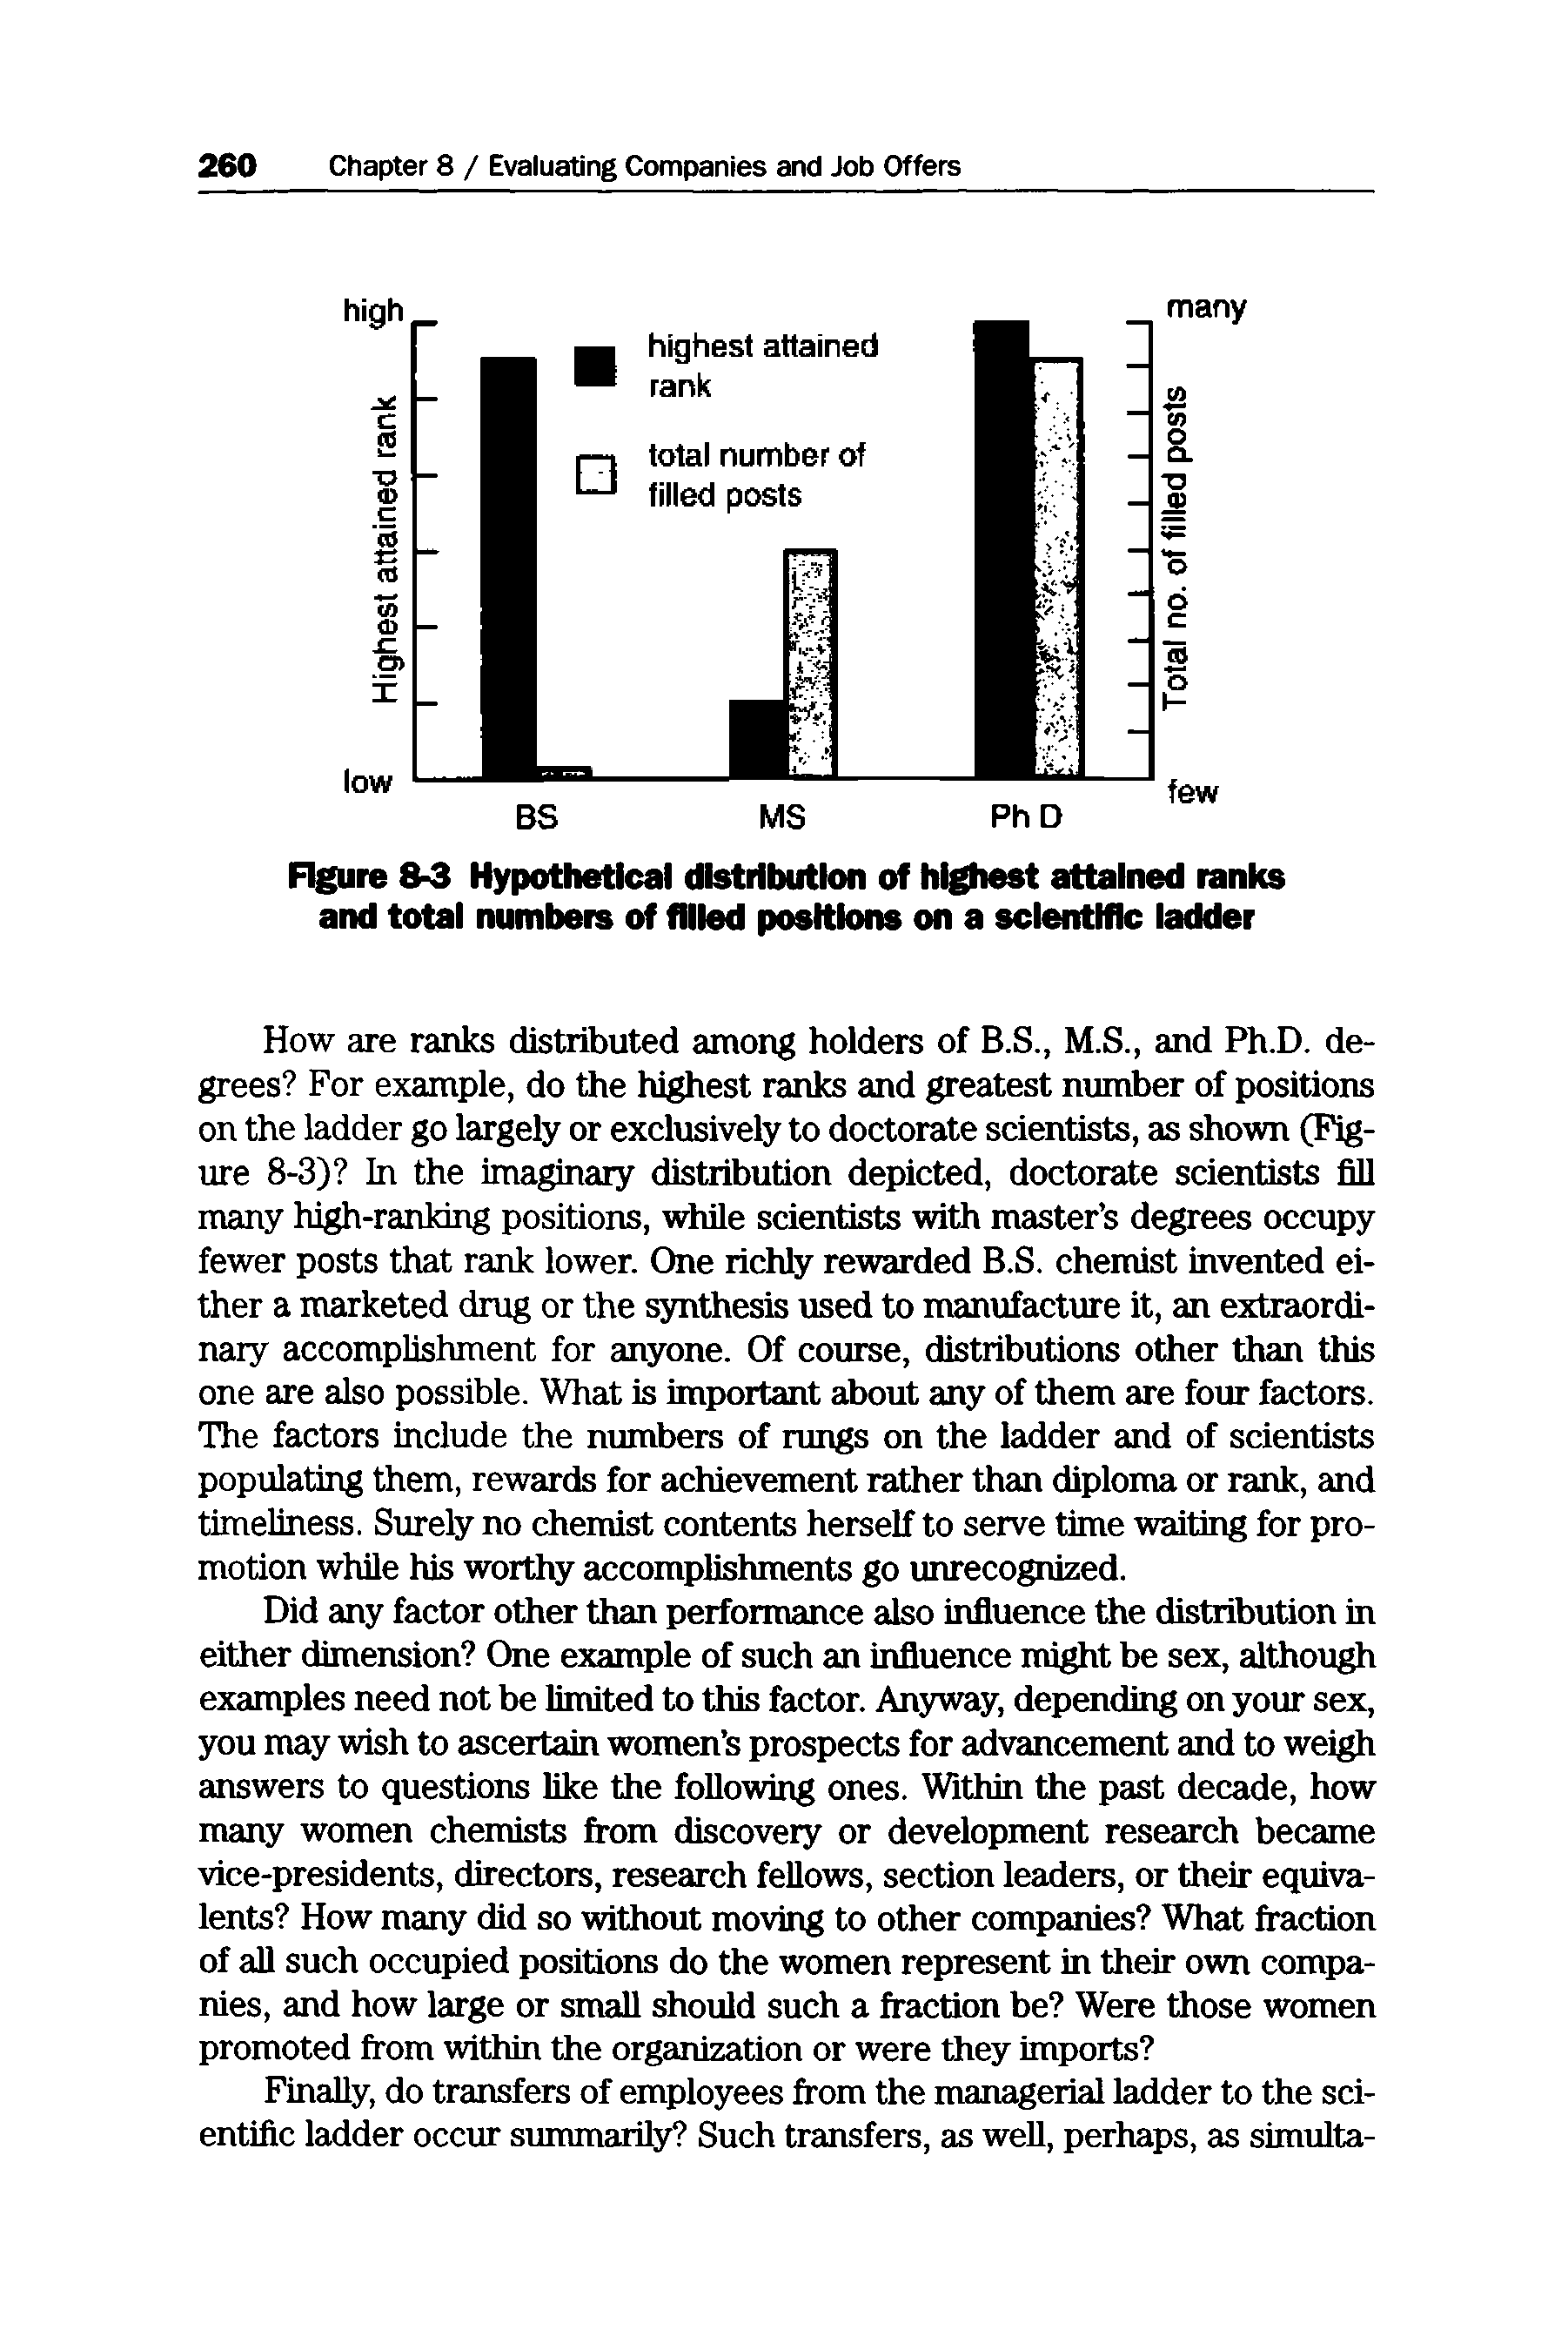 Figure 8-3 Hypothetical distribution of highest attained ranks and total numbers of filled positions on a scientific ladder...